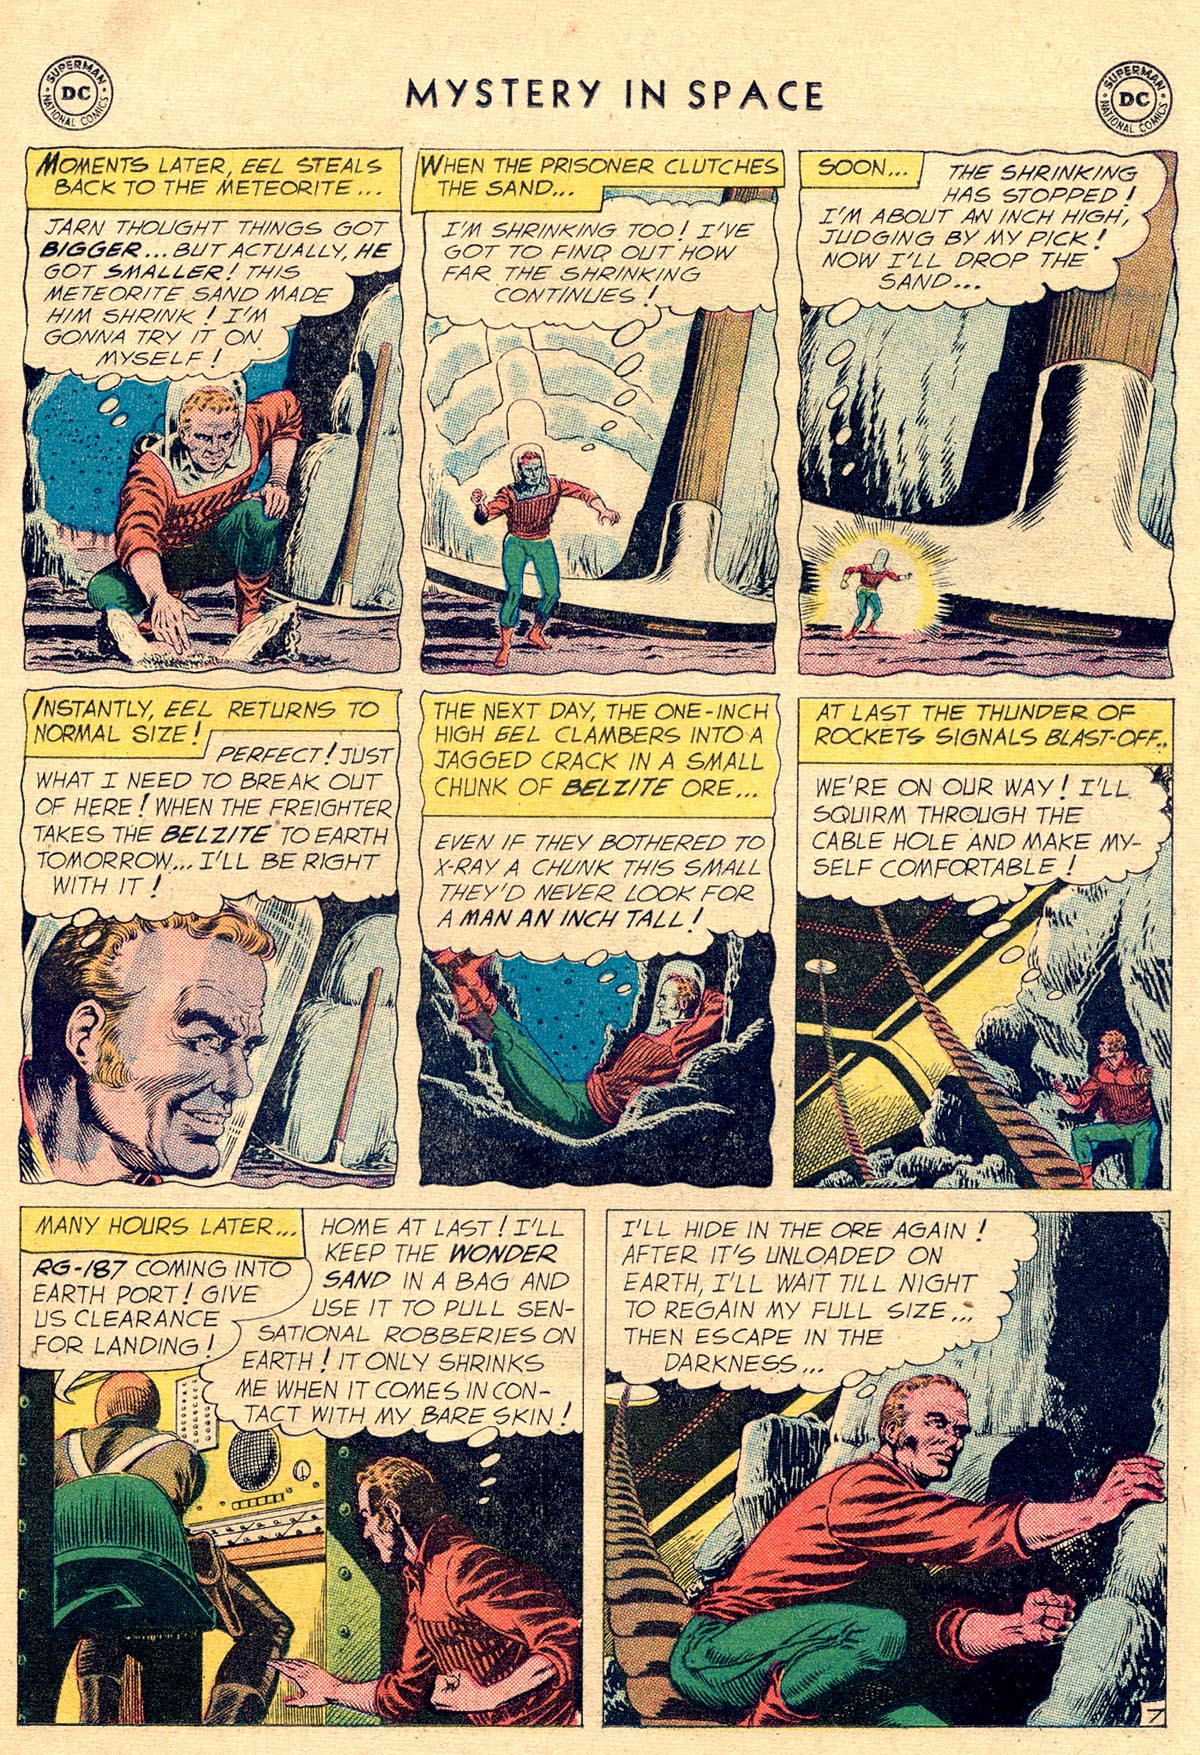 Mystery in Space (1951) 46 Page 22